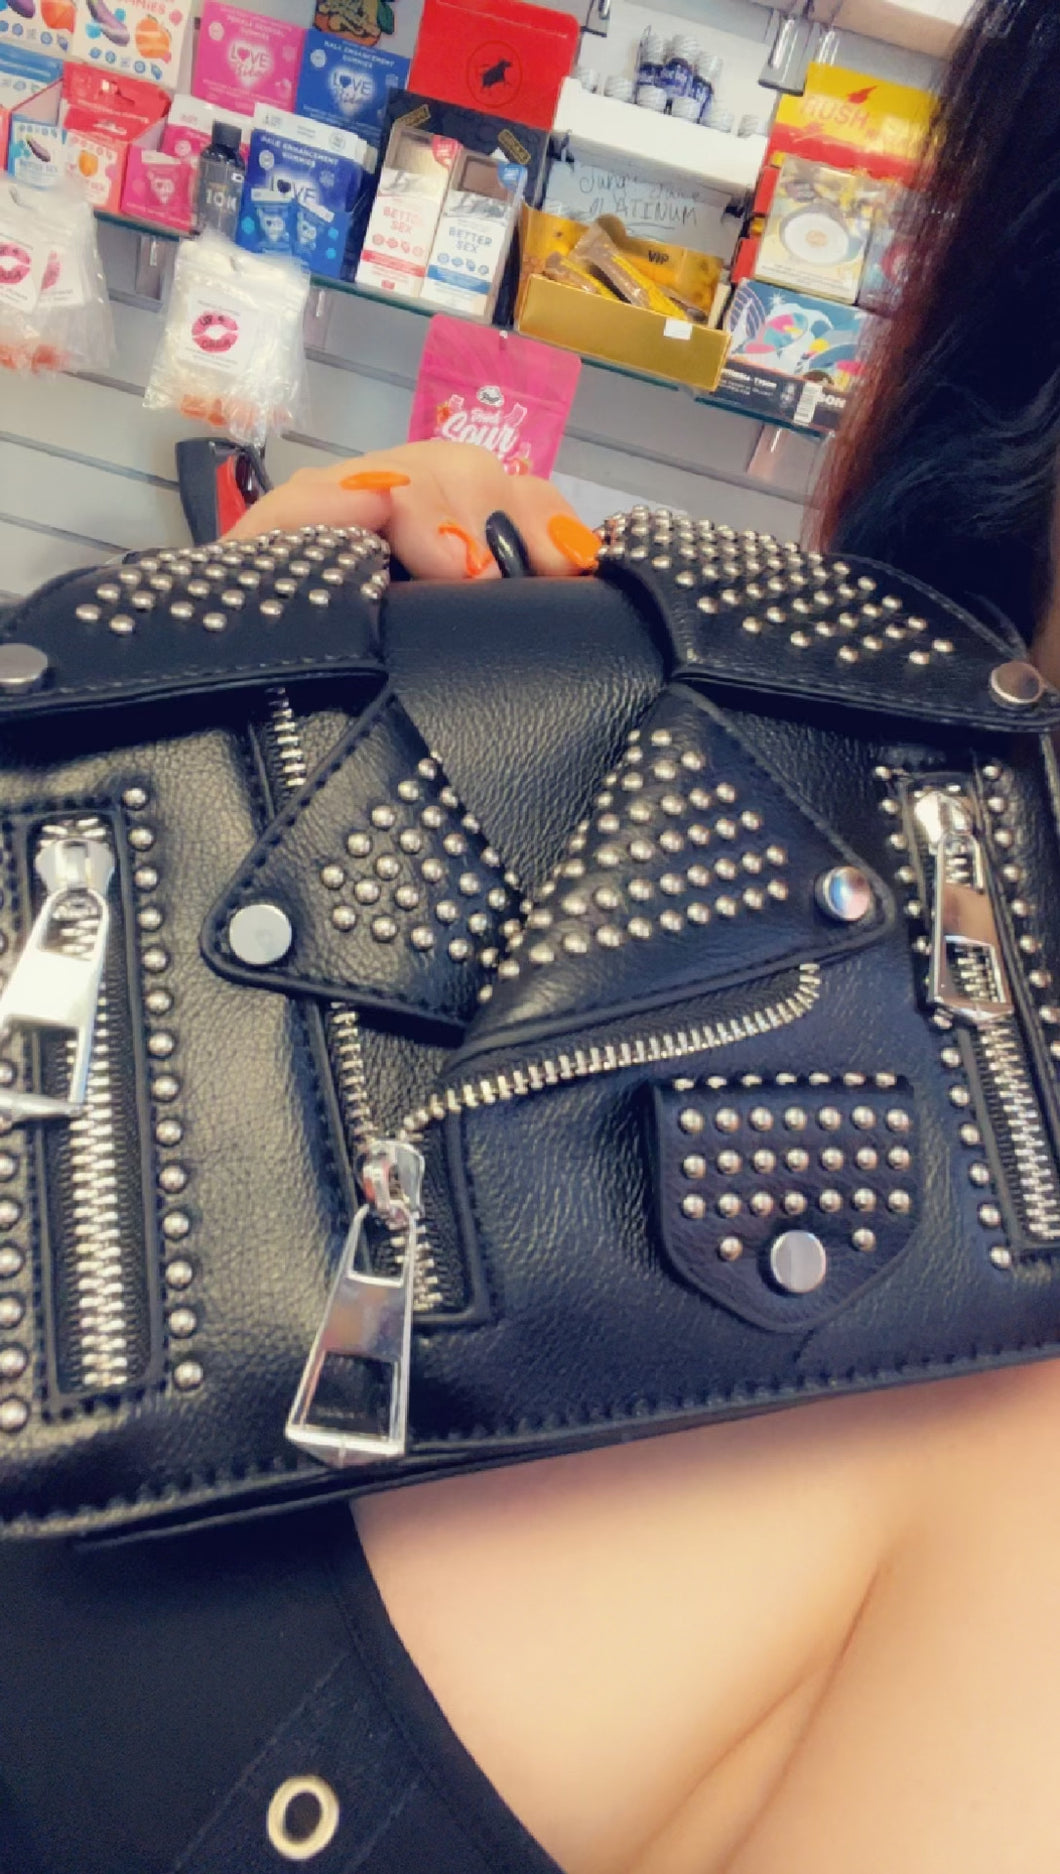 Metal studded purse with strap